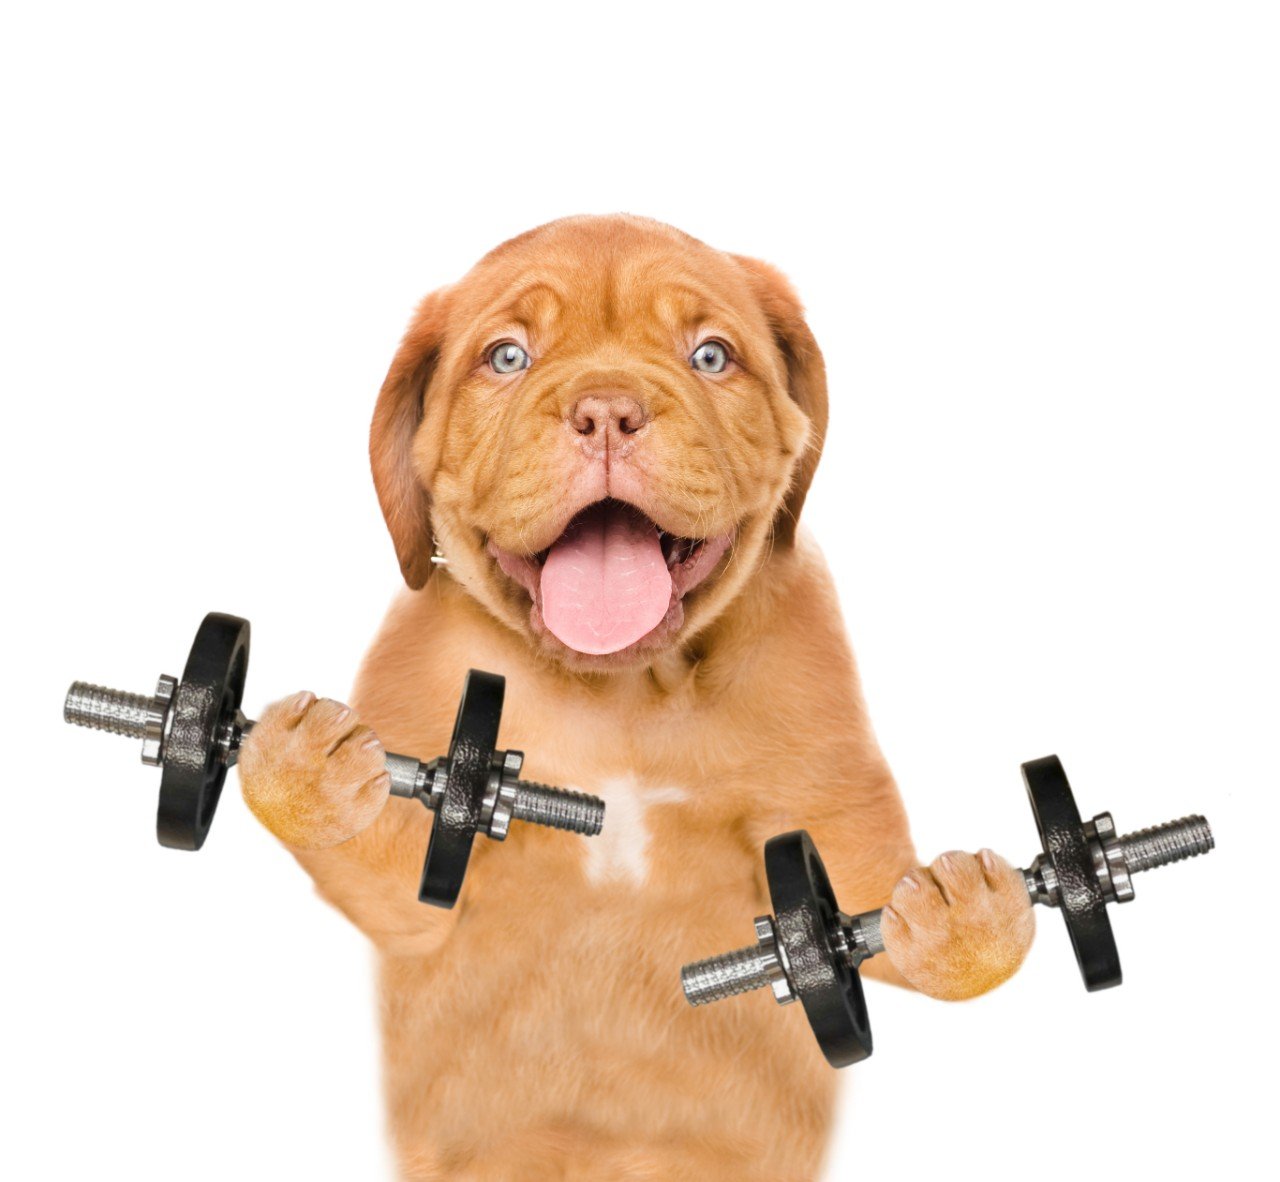 Training Workouts for Вogs. Teach Your Pet More Workouts